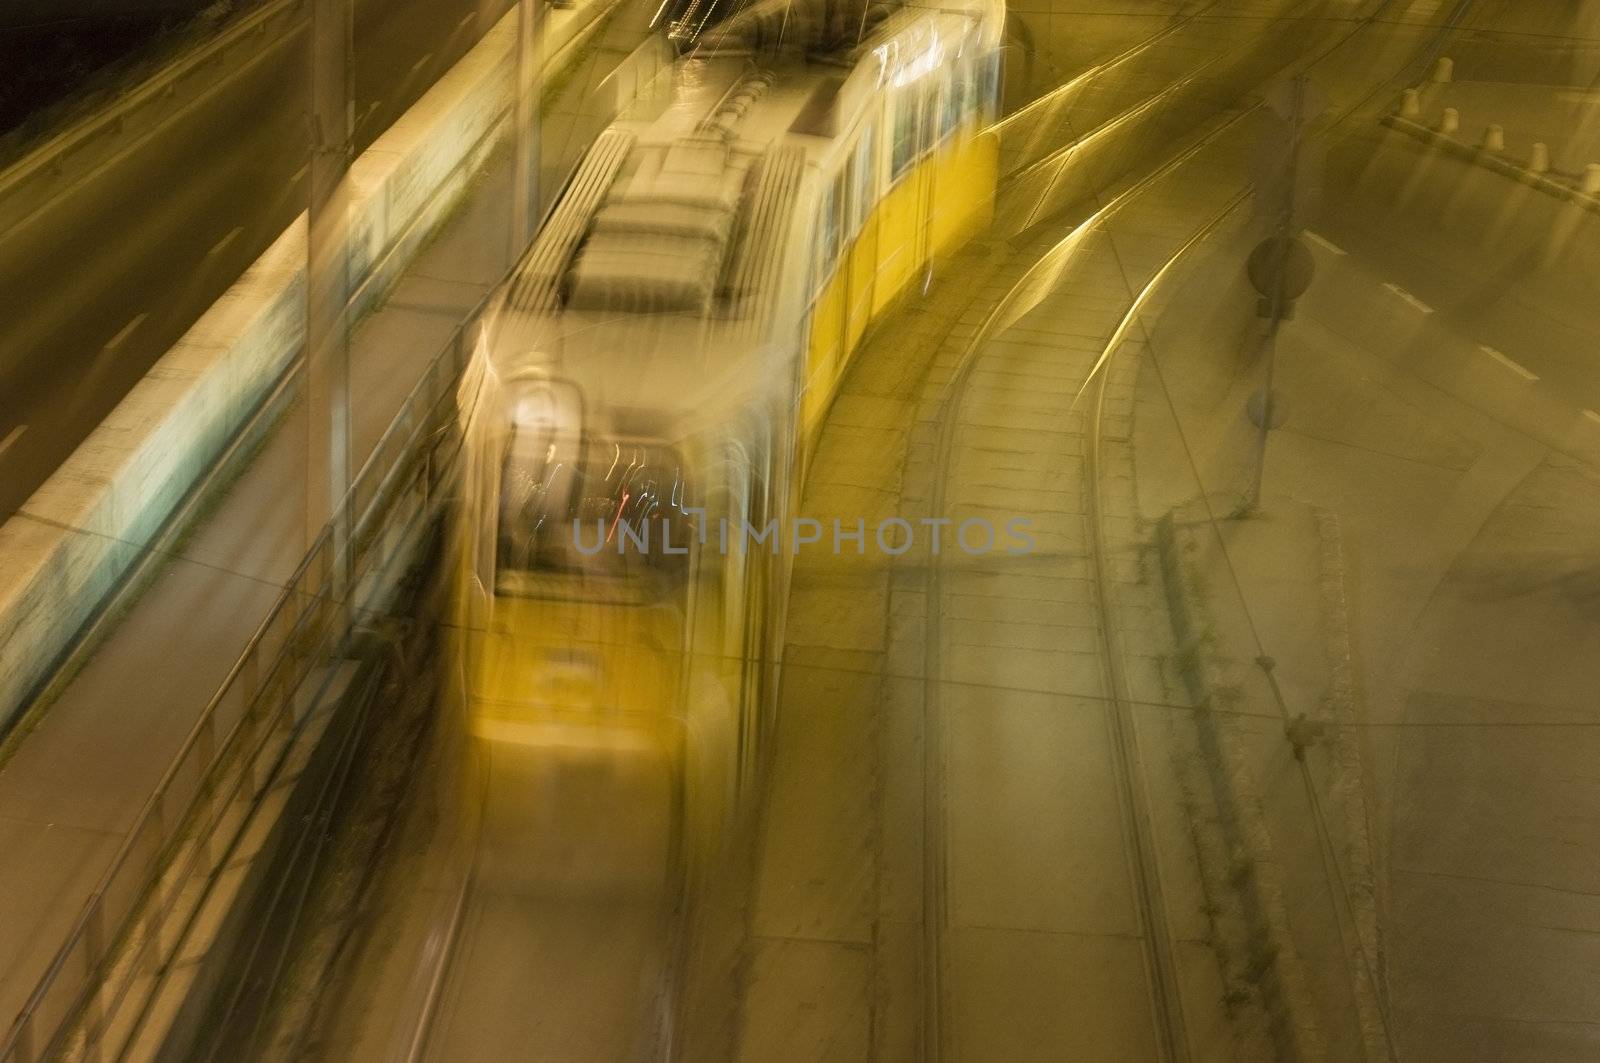 Night tram at Budapest, Hungary by photo4dreams